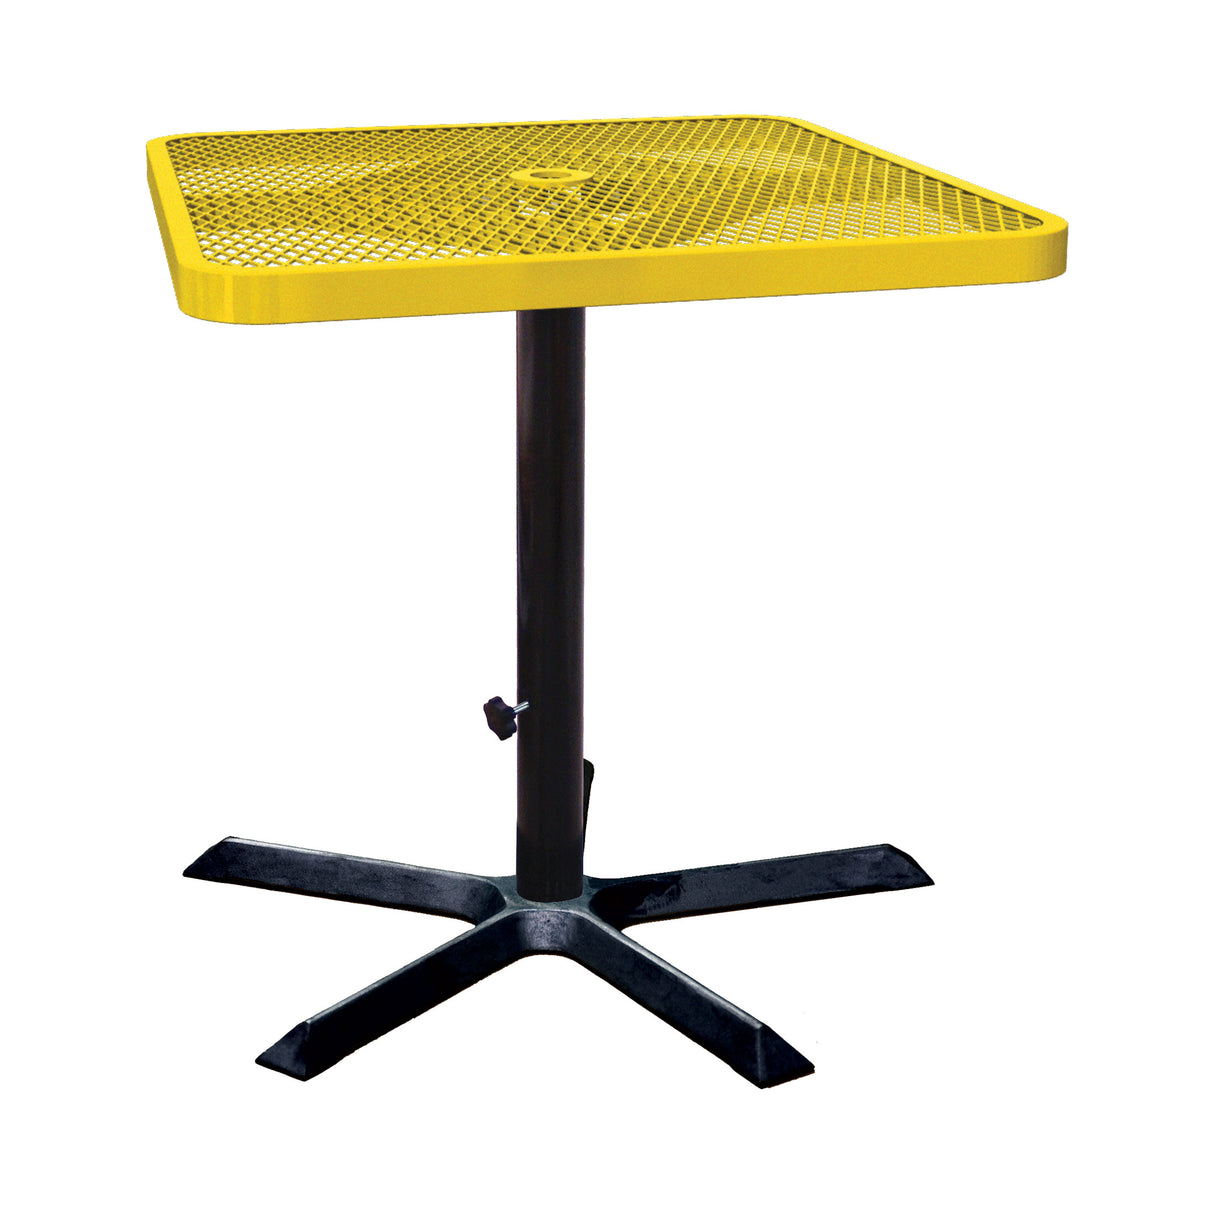 yellow square expanded pedestal table with 5-point base